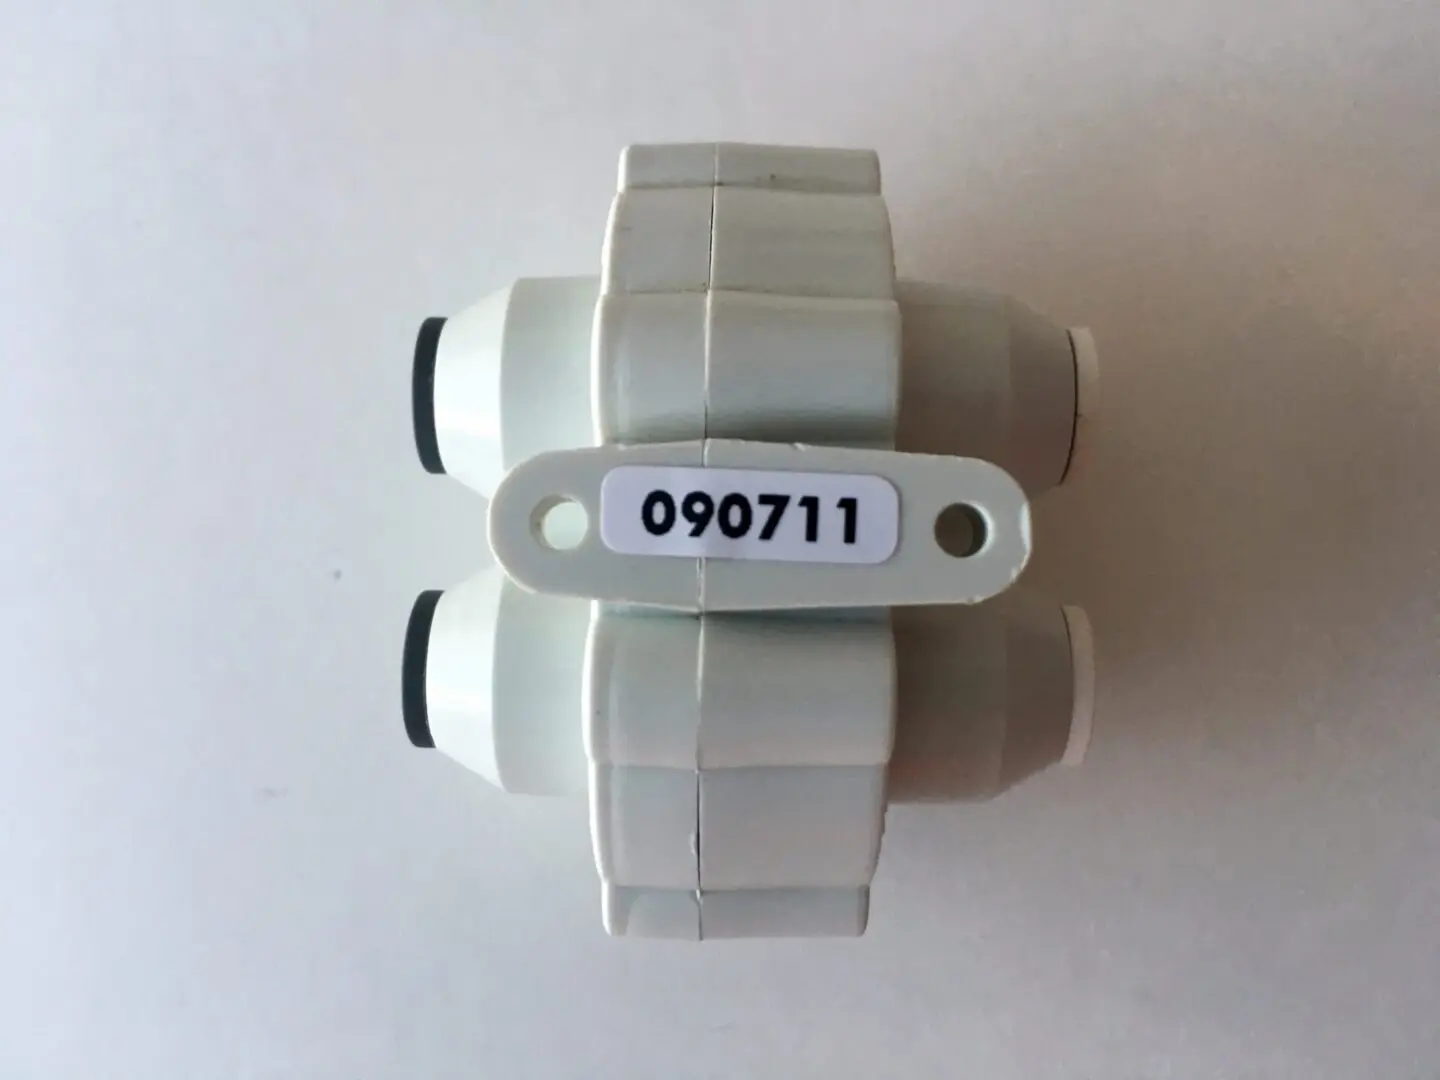 A white plastic object with a number on it.